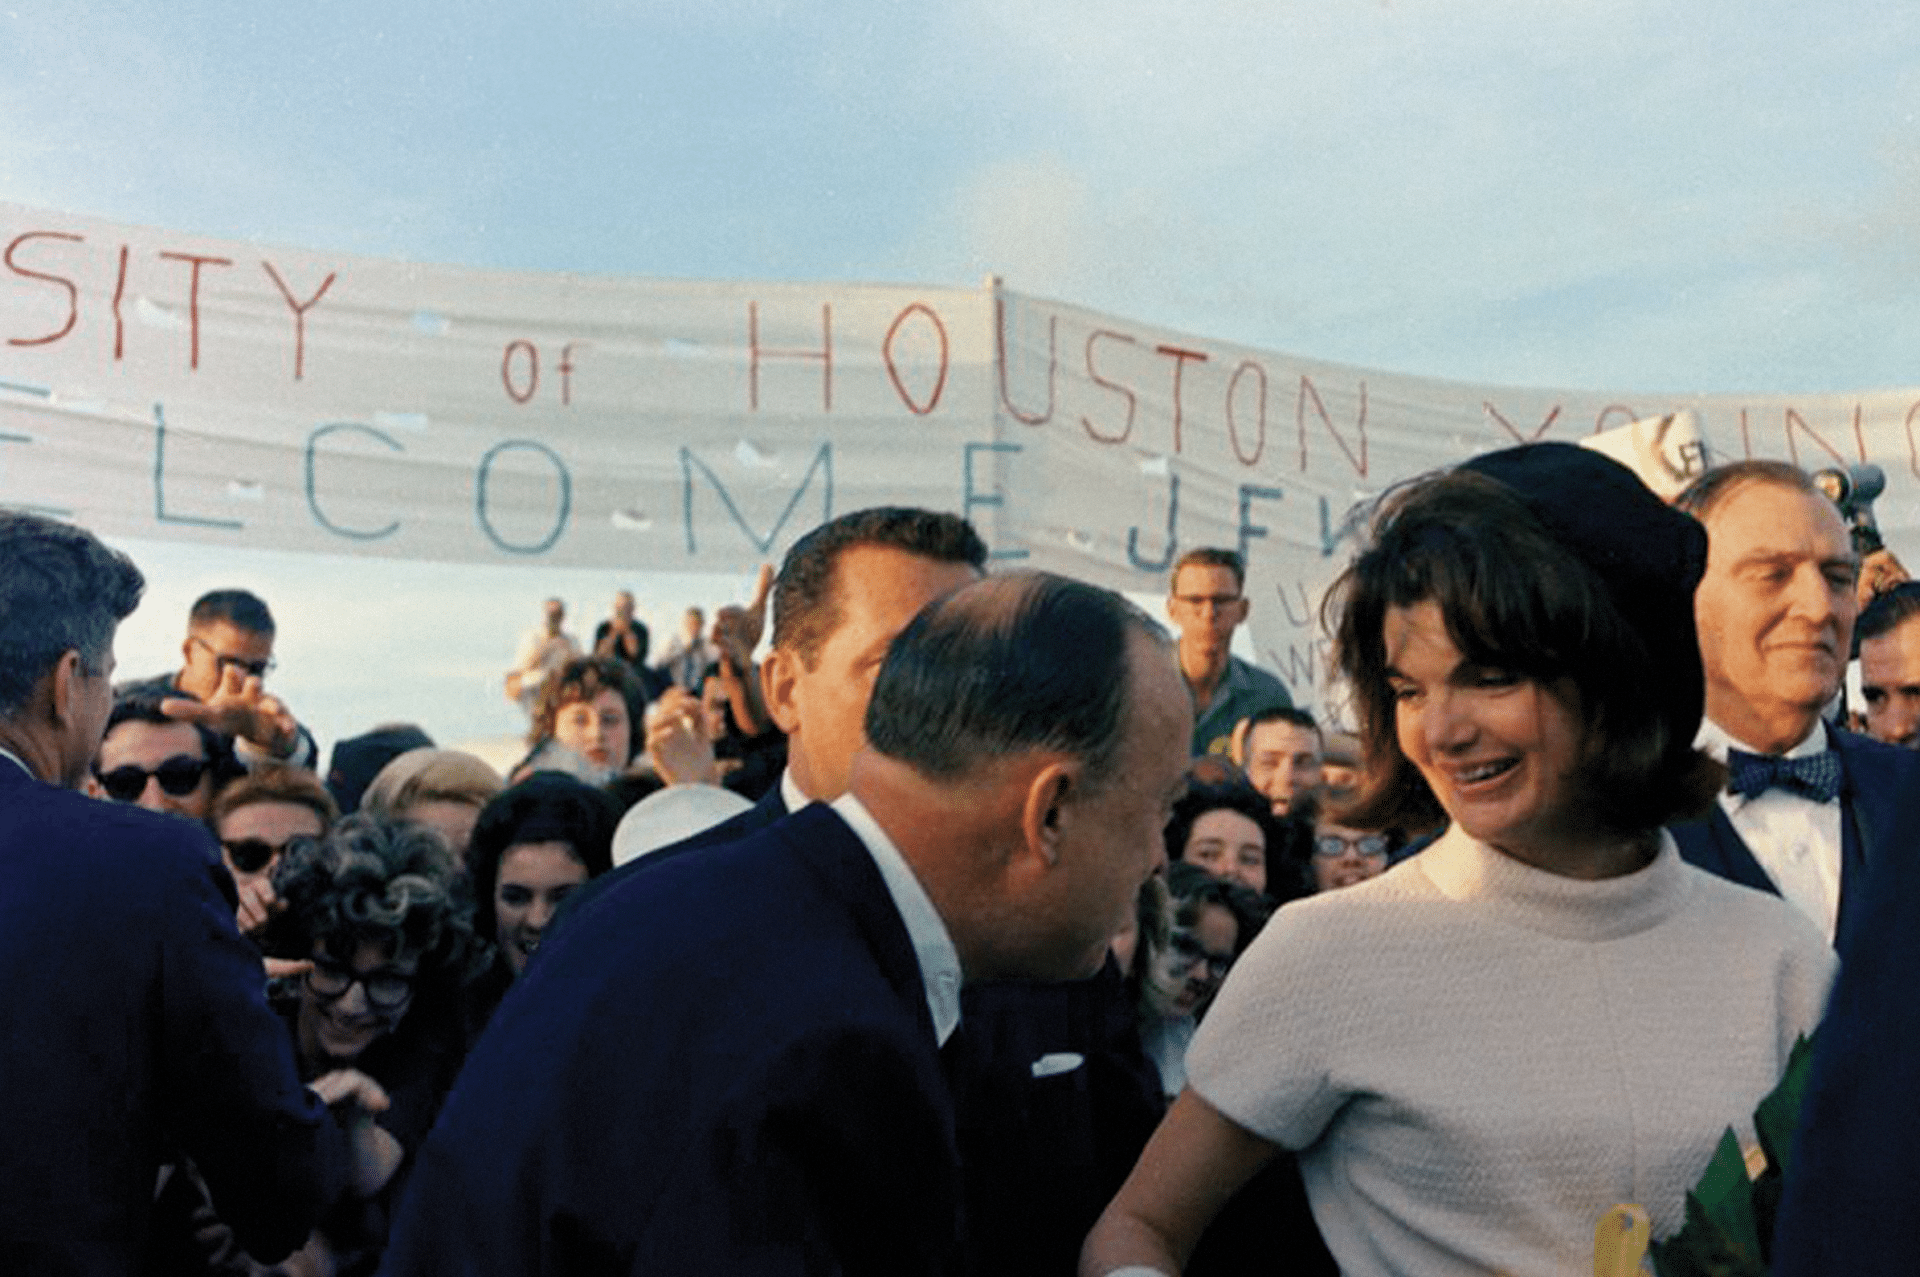 President and Mrs. Kennedy, followed by Governor John and Nellie Connally, disembark Air Force One in Houston on November 21, 1963.
Cecil Stoughton. White House Photographs. John F. Kennedy Presidential Library and Museum, Boston